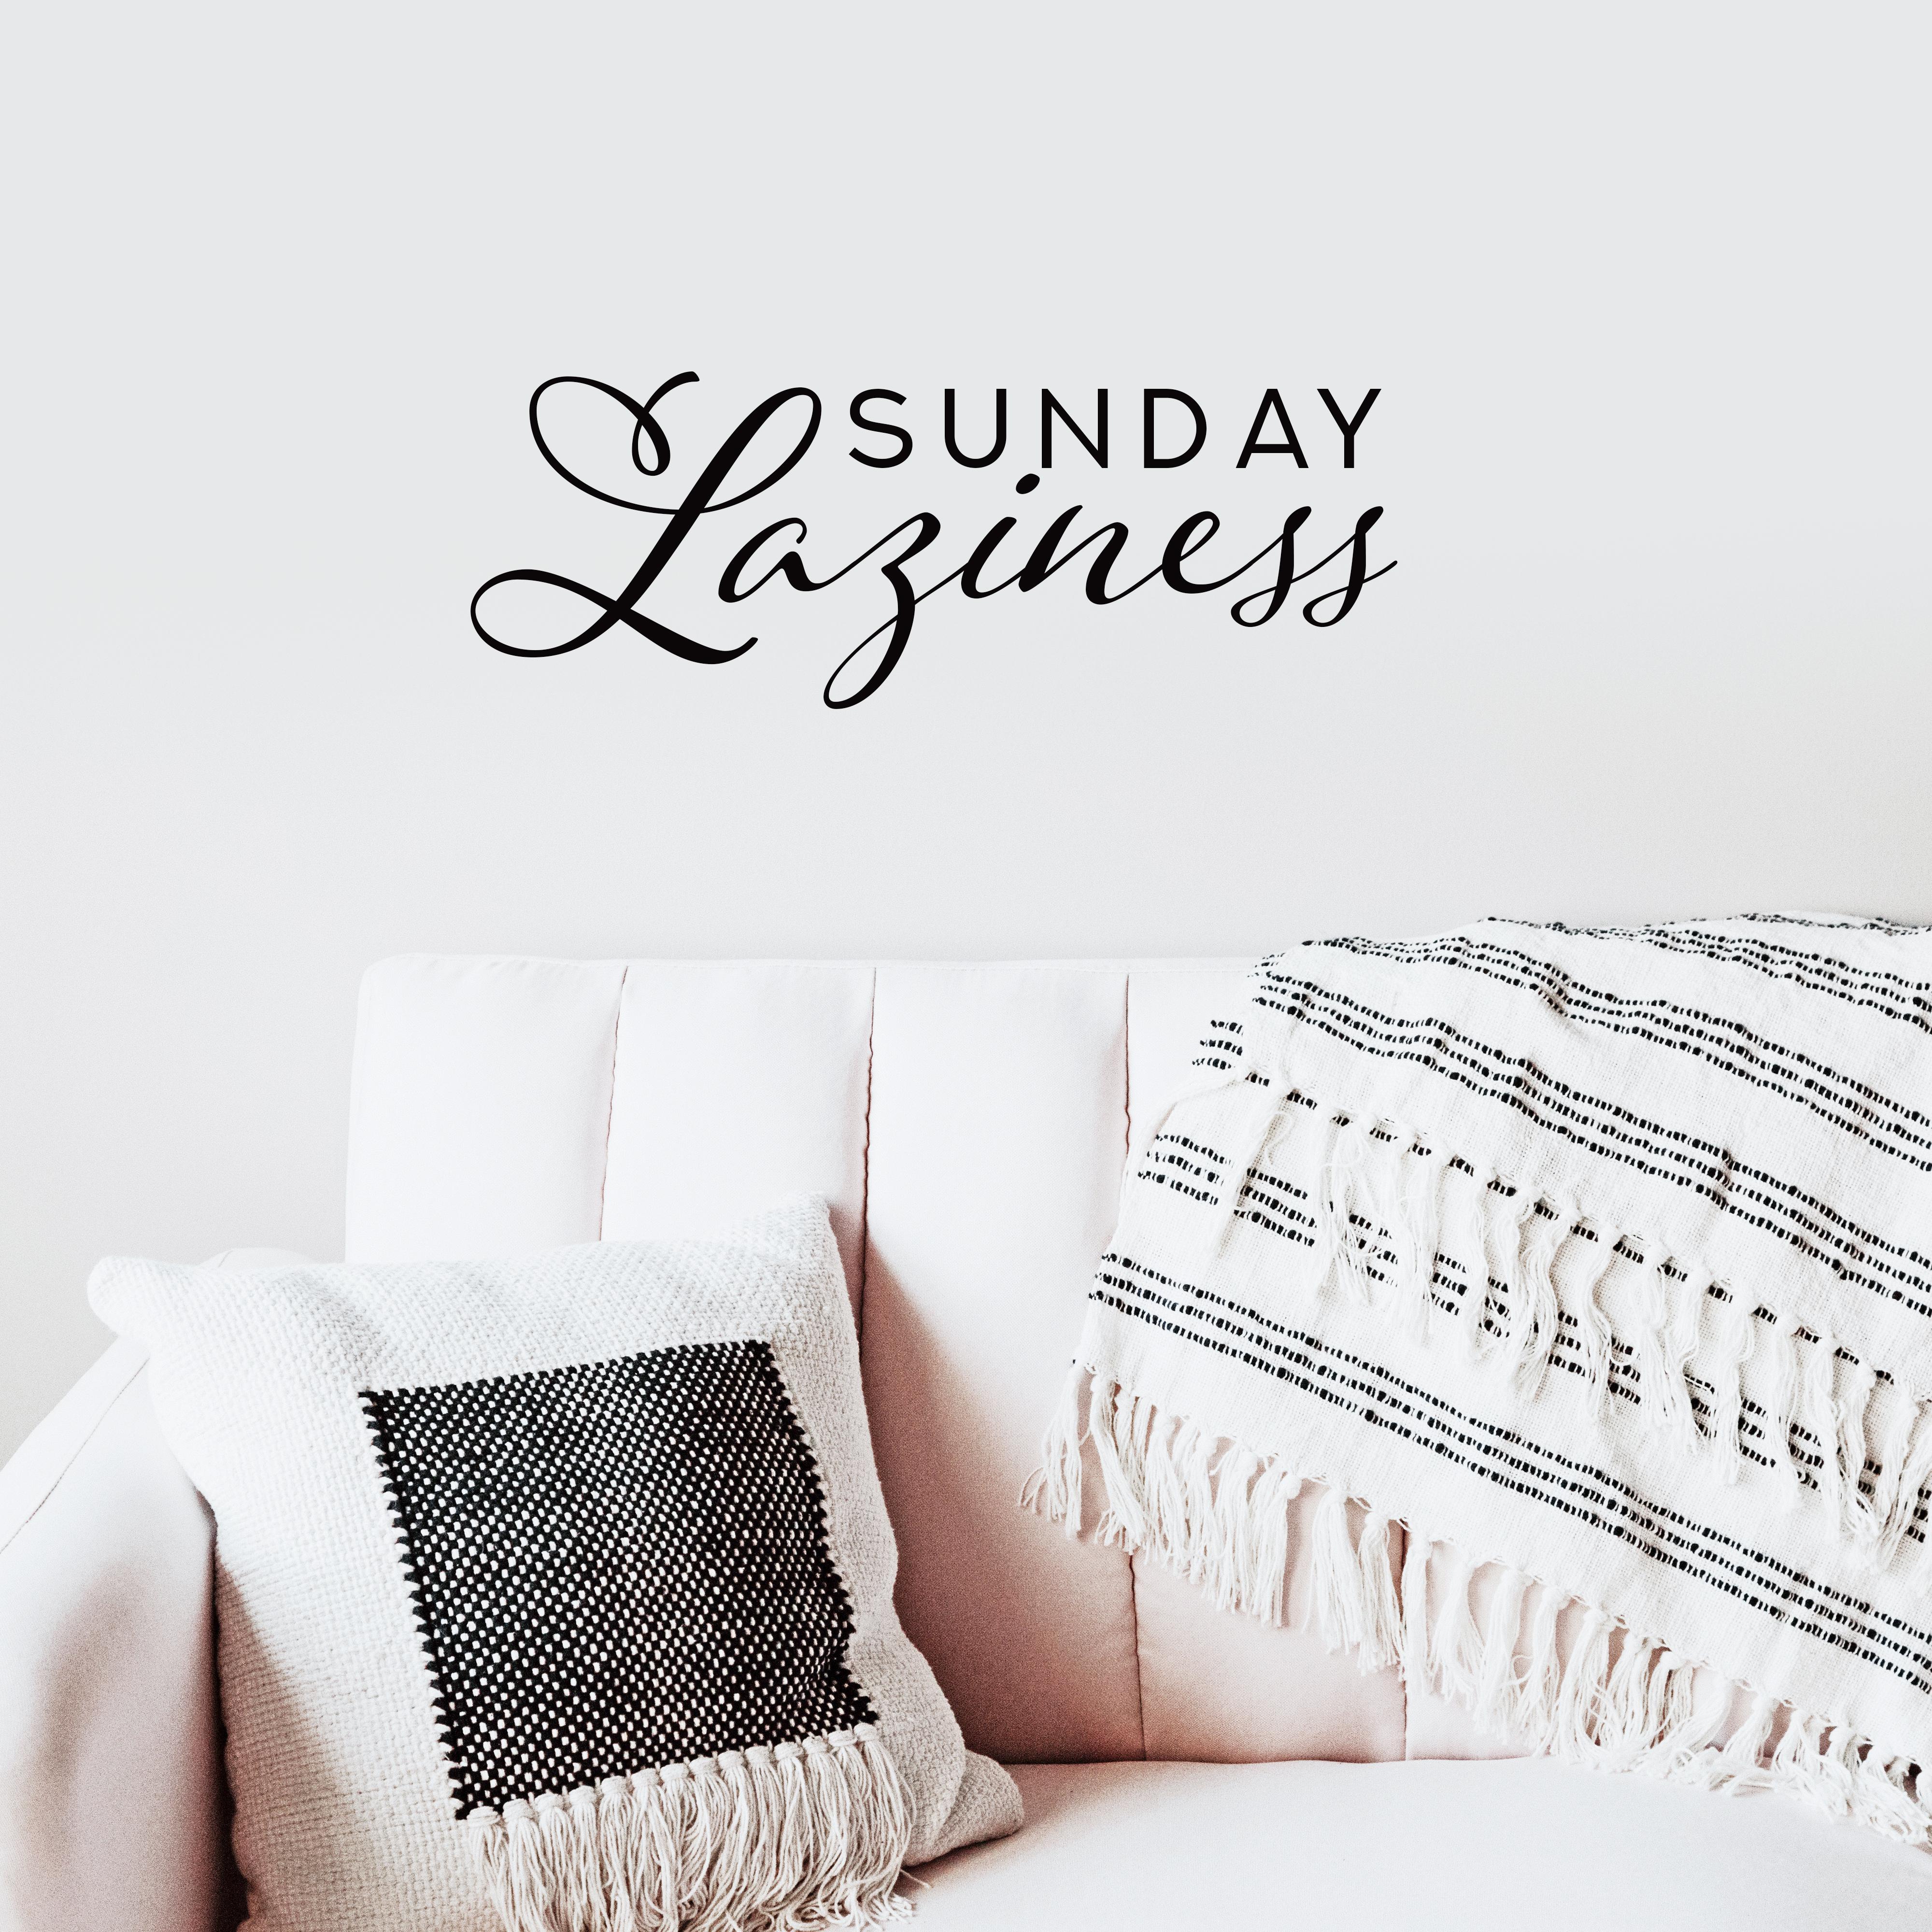 Sunday Laziness: Unusual Chillout Melodies for Rest, Stress Relief and Relaxation